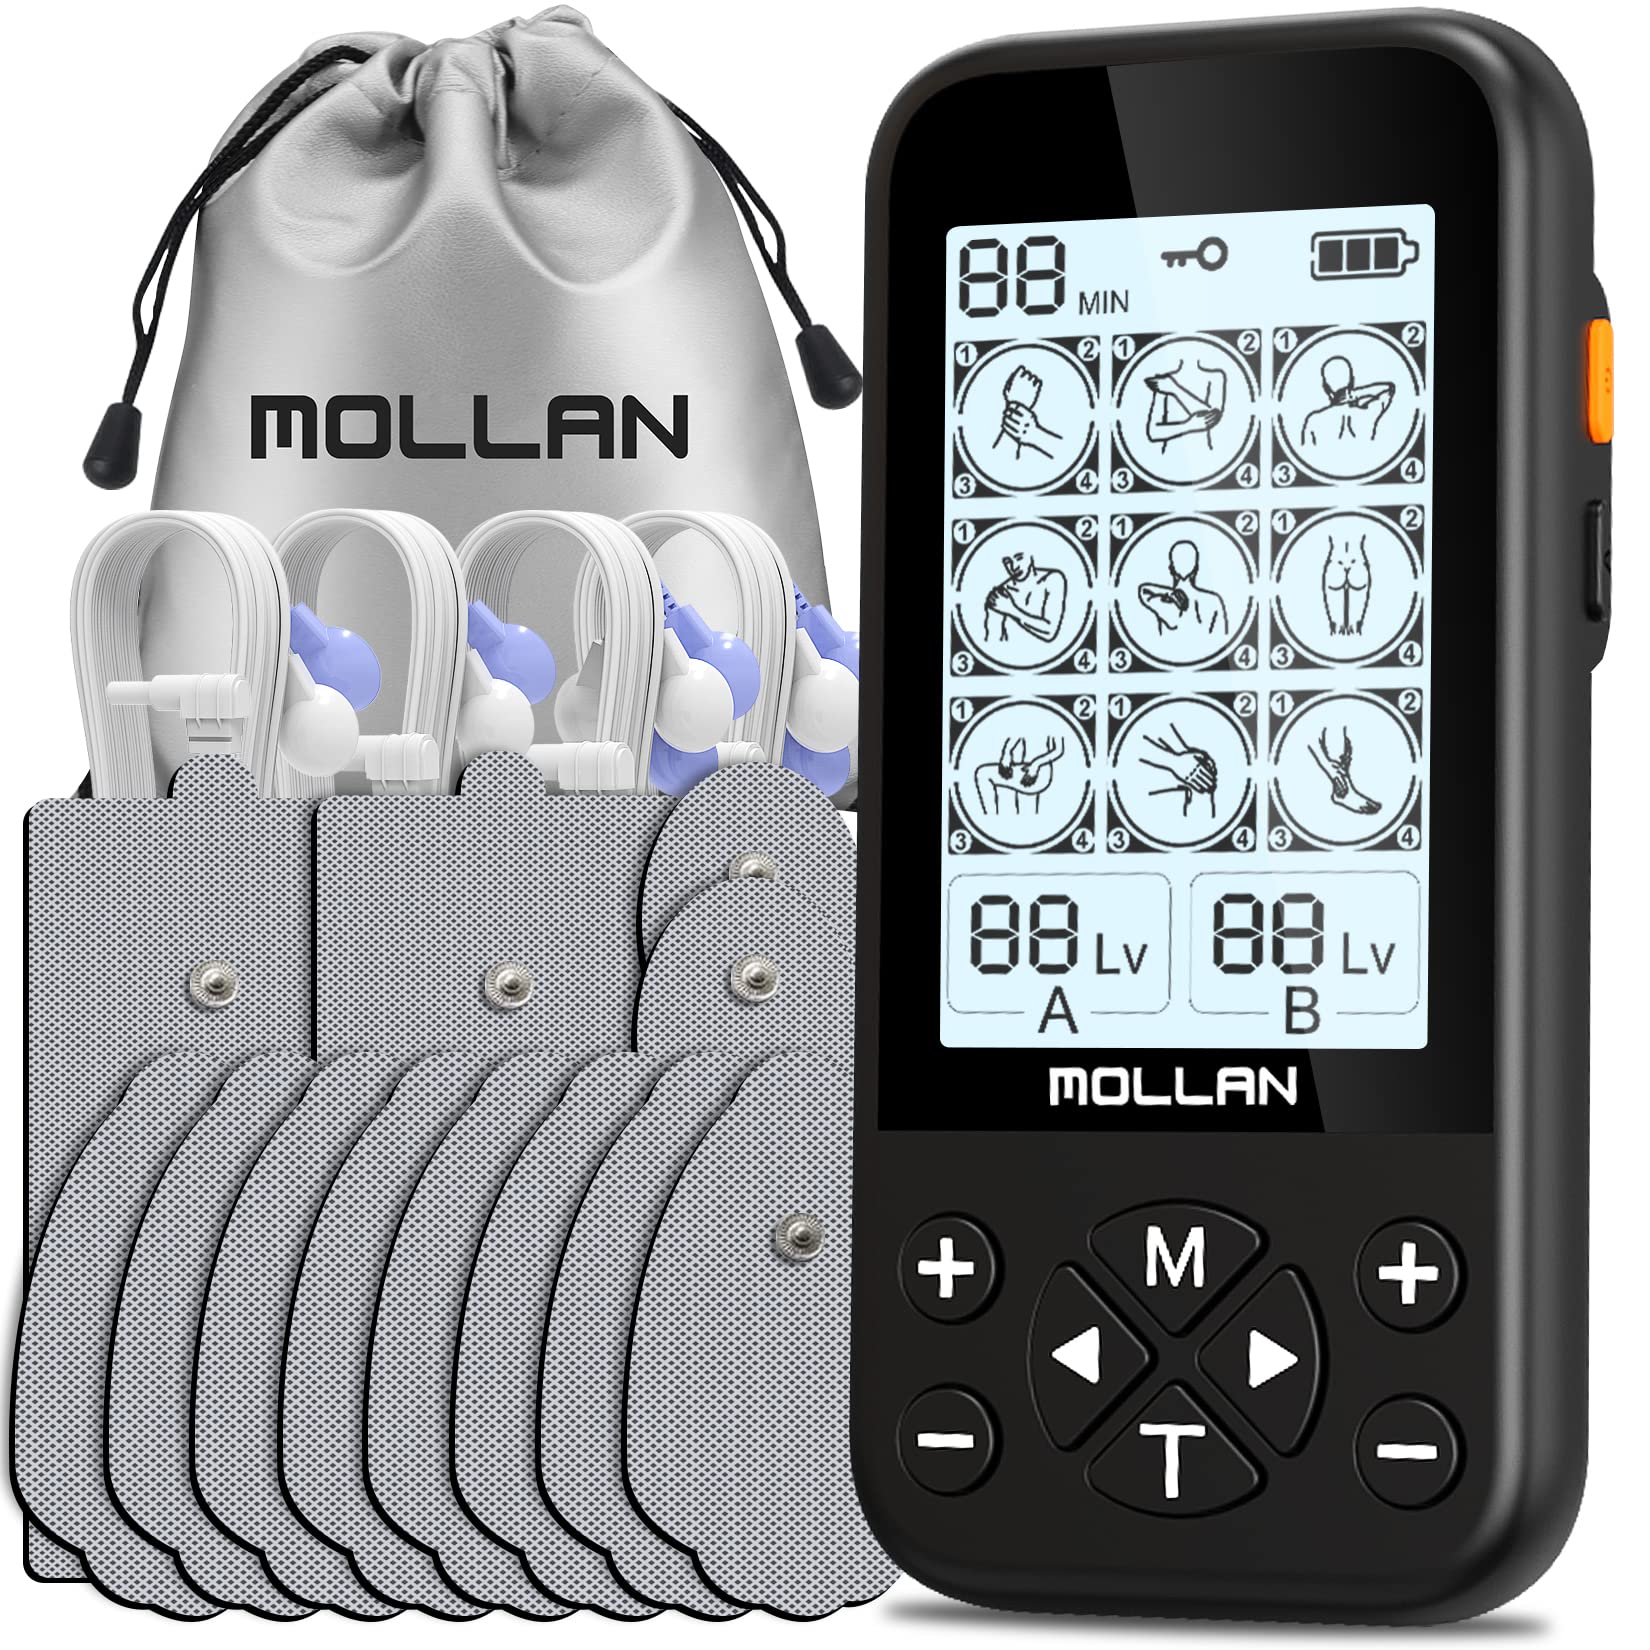 EMS TENS Unit Muscle Stimulator, 36 Modes Dual Channel Electronic Pulse  Massager For Pain Relief/Management & Muscle Strength Rechargeable TENS  Machine With 8 Pcs Electrode Pads